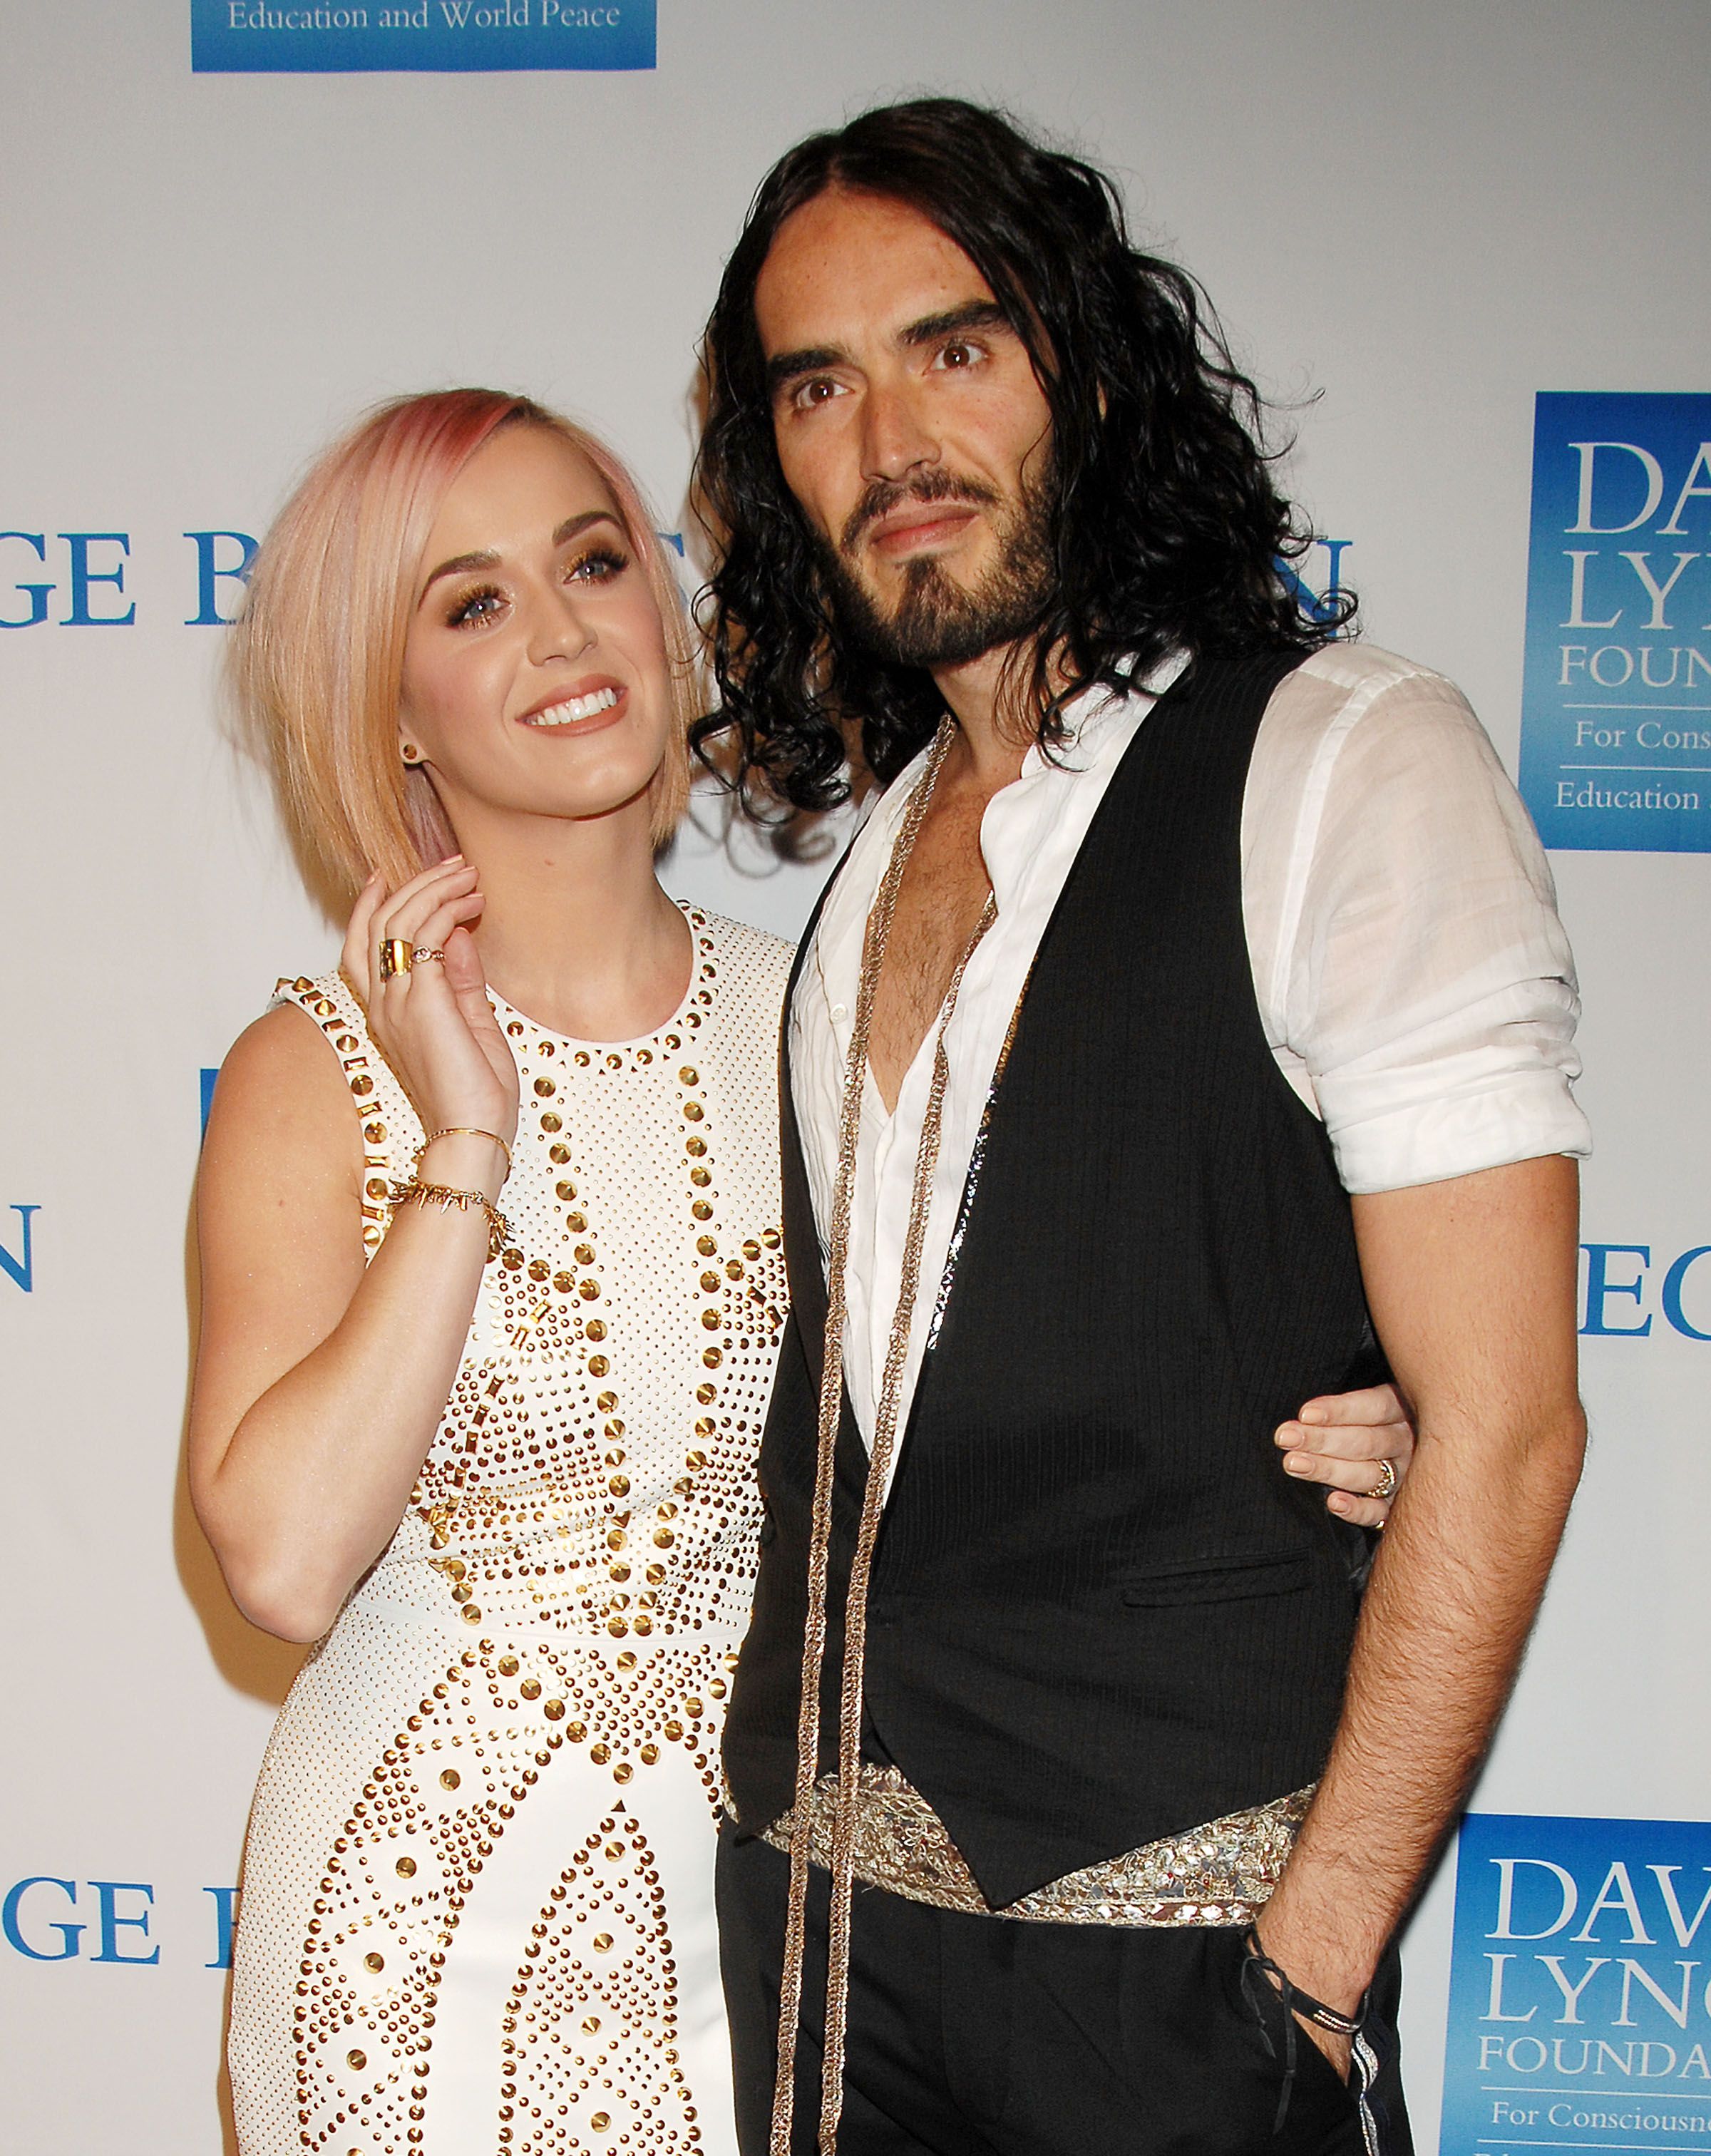 CU-Katy Perry-3rd Annual Change Begins Within Benefit Celebration-02.JPG